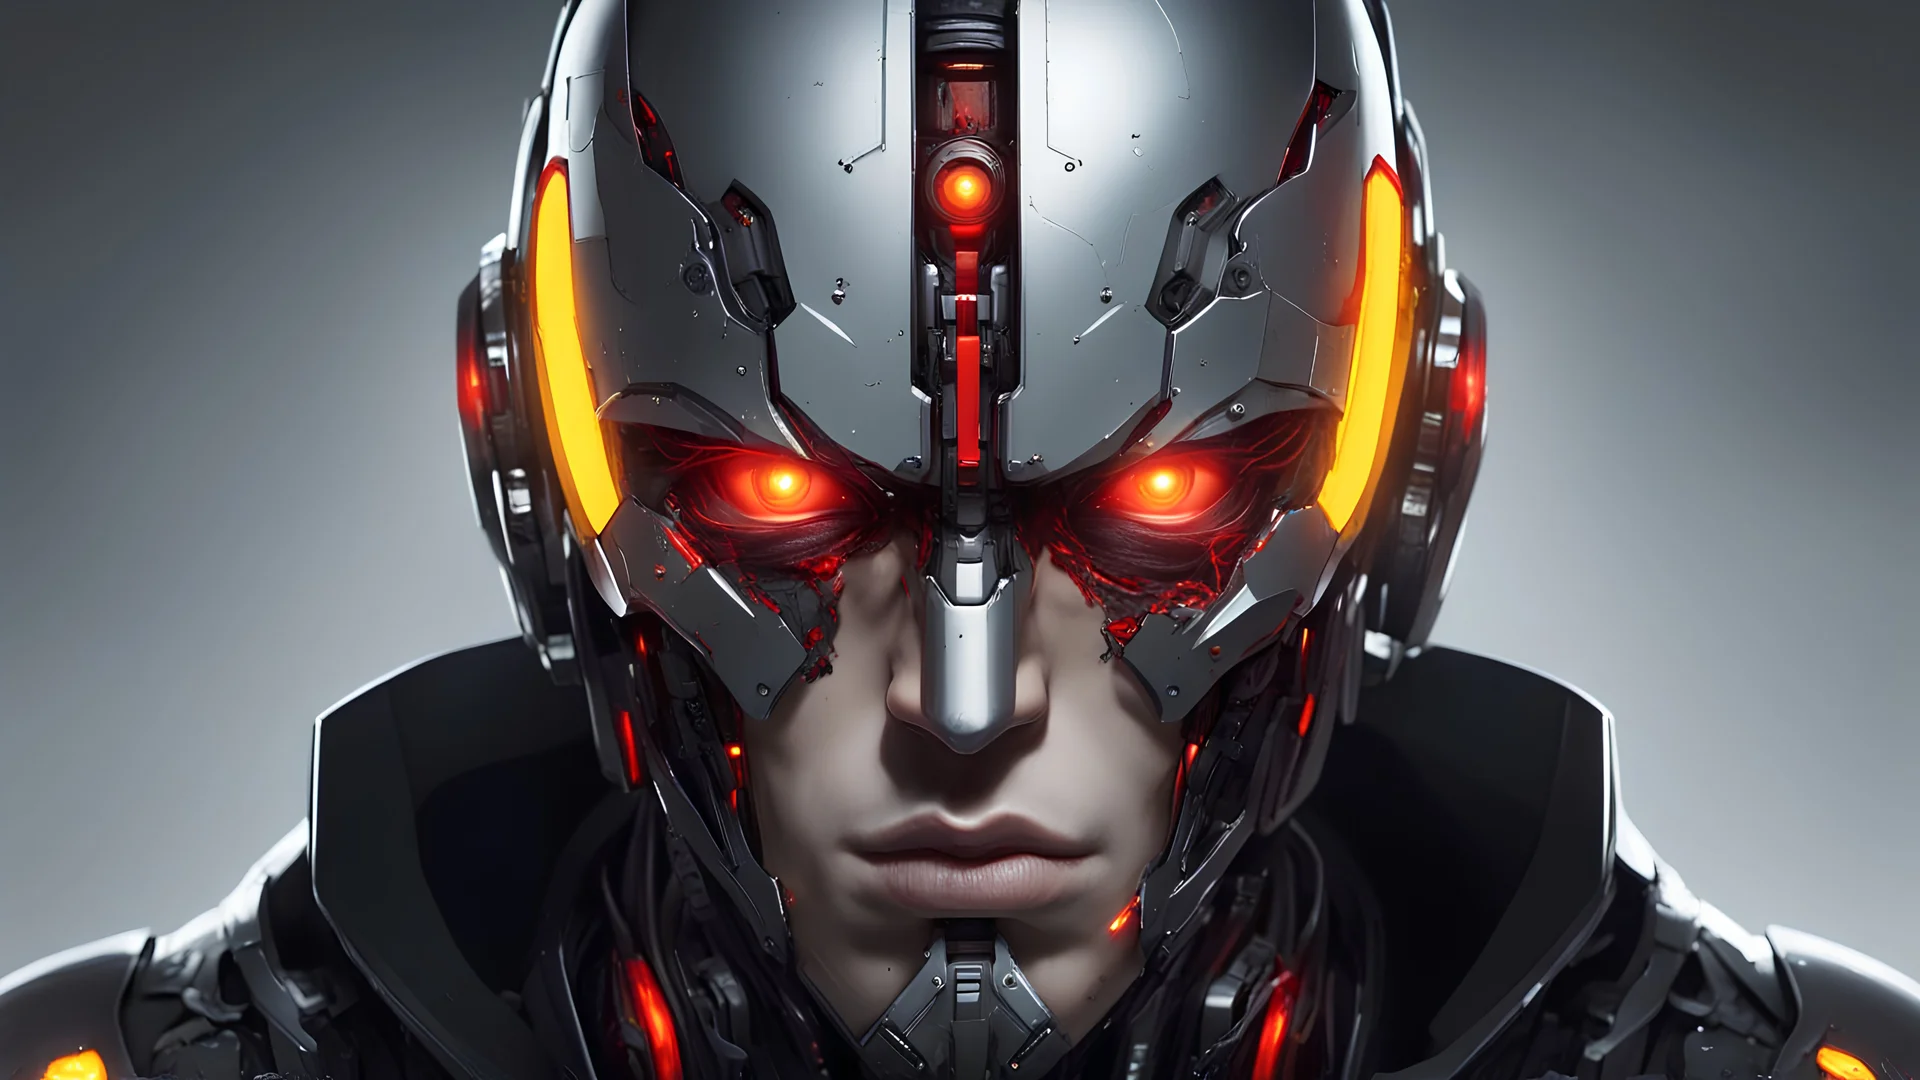 Create a character that is a cyborg. His face should have a vertical split line down the center. Half of the face will be a man with red skin and a yellow glowing eye and dark hair. The other half of the vertical split with be a metal robot with a scary face and a red glowing eye. And he should have on a black coat wit a big hood on like a mythical character that practices dark magic.